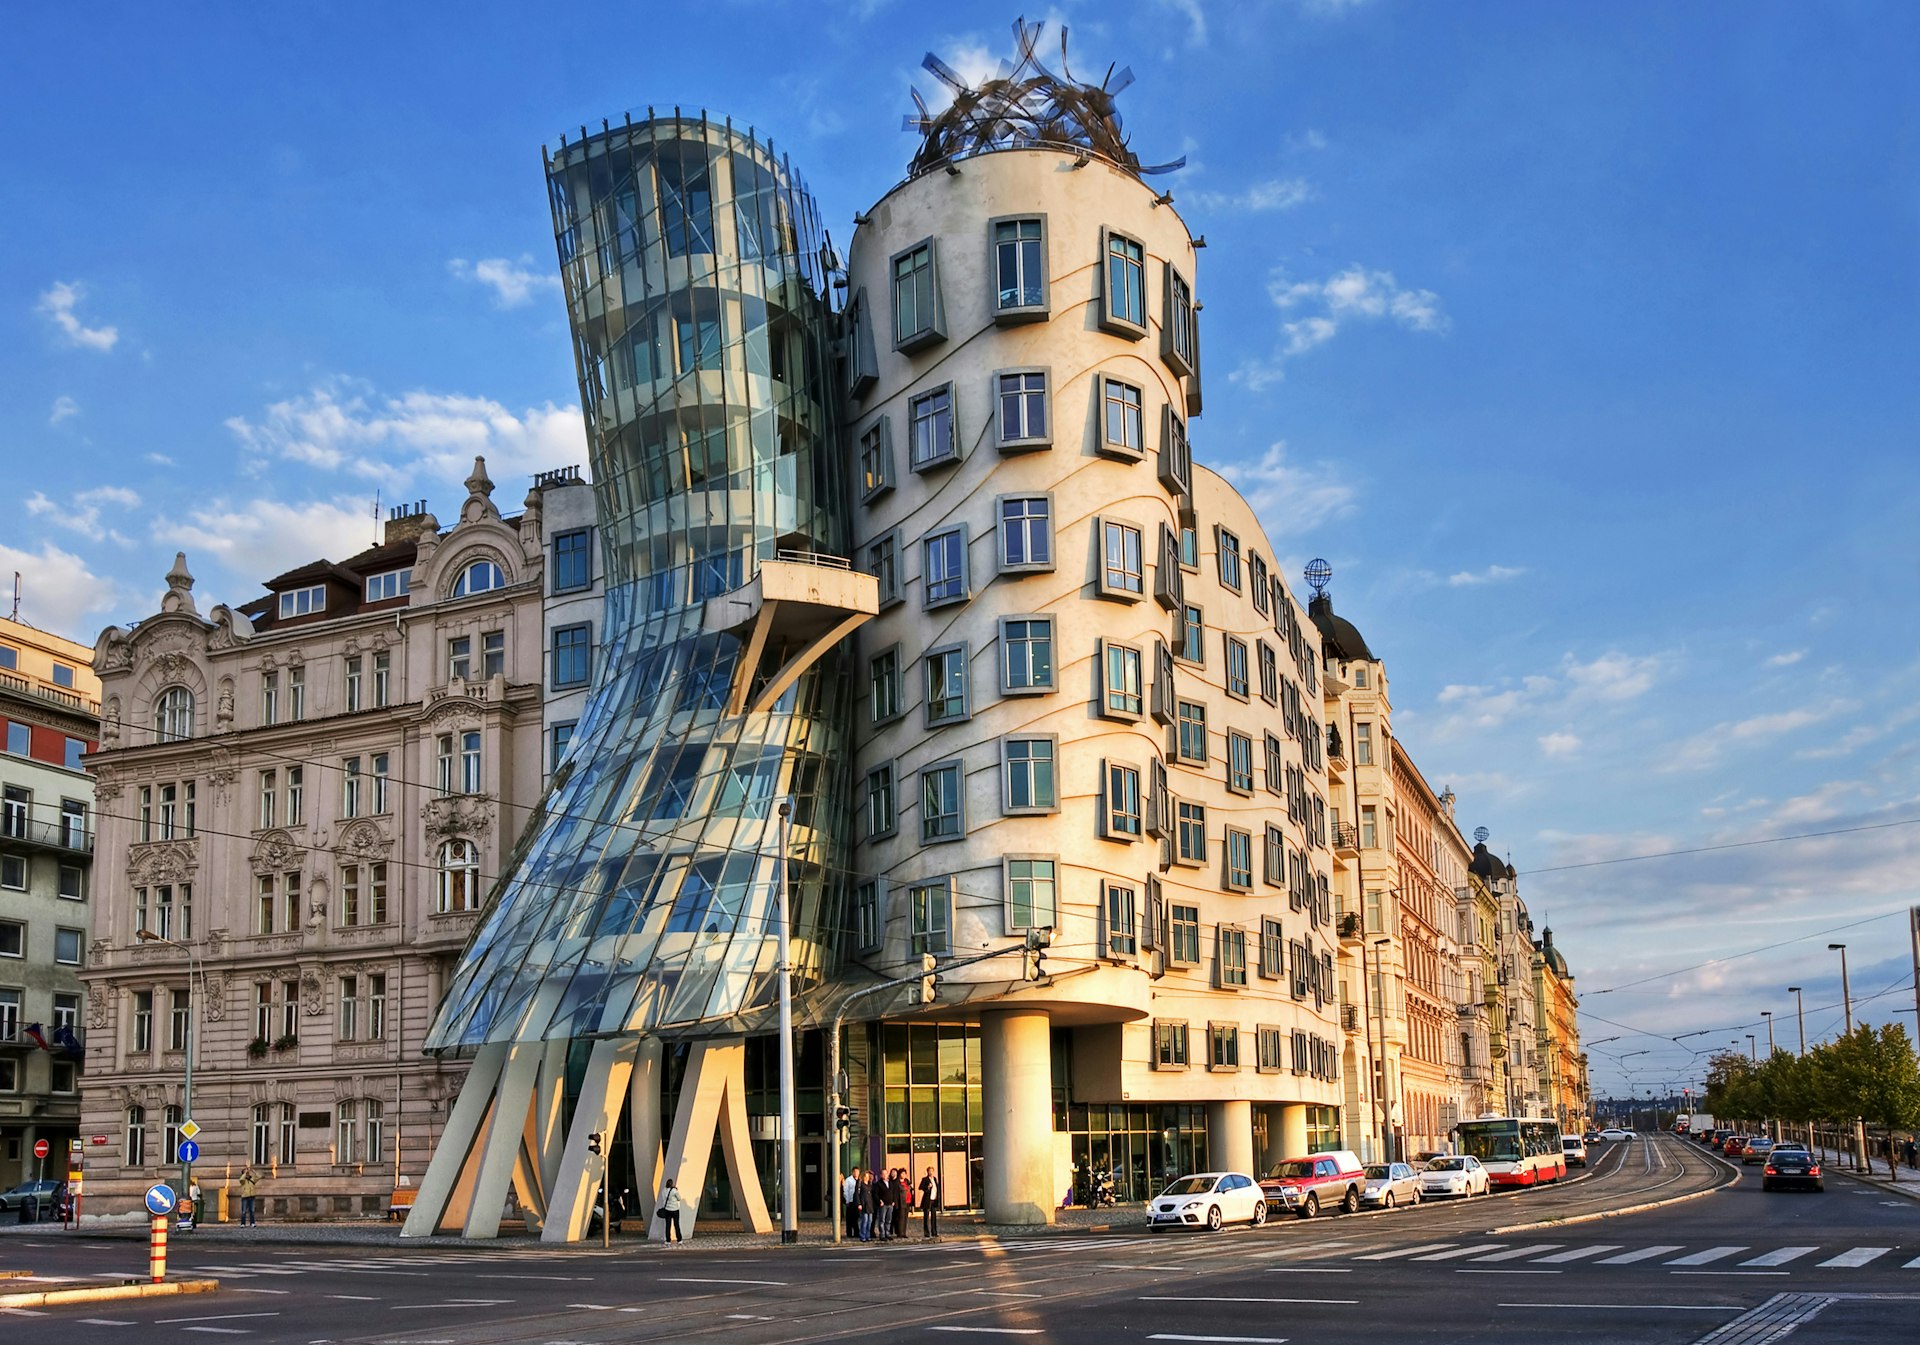 The Dancing House, a modern piece of architecture designed by Vlado Milunic and Frank Gehry in Prague, sees one building squish into another artistically